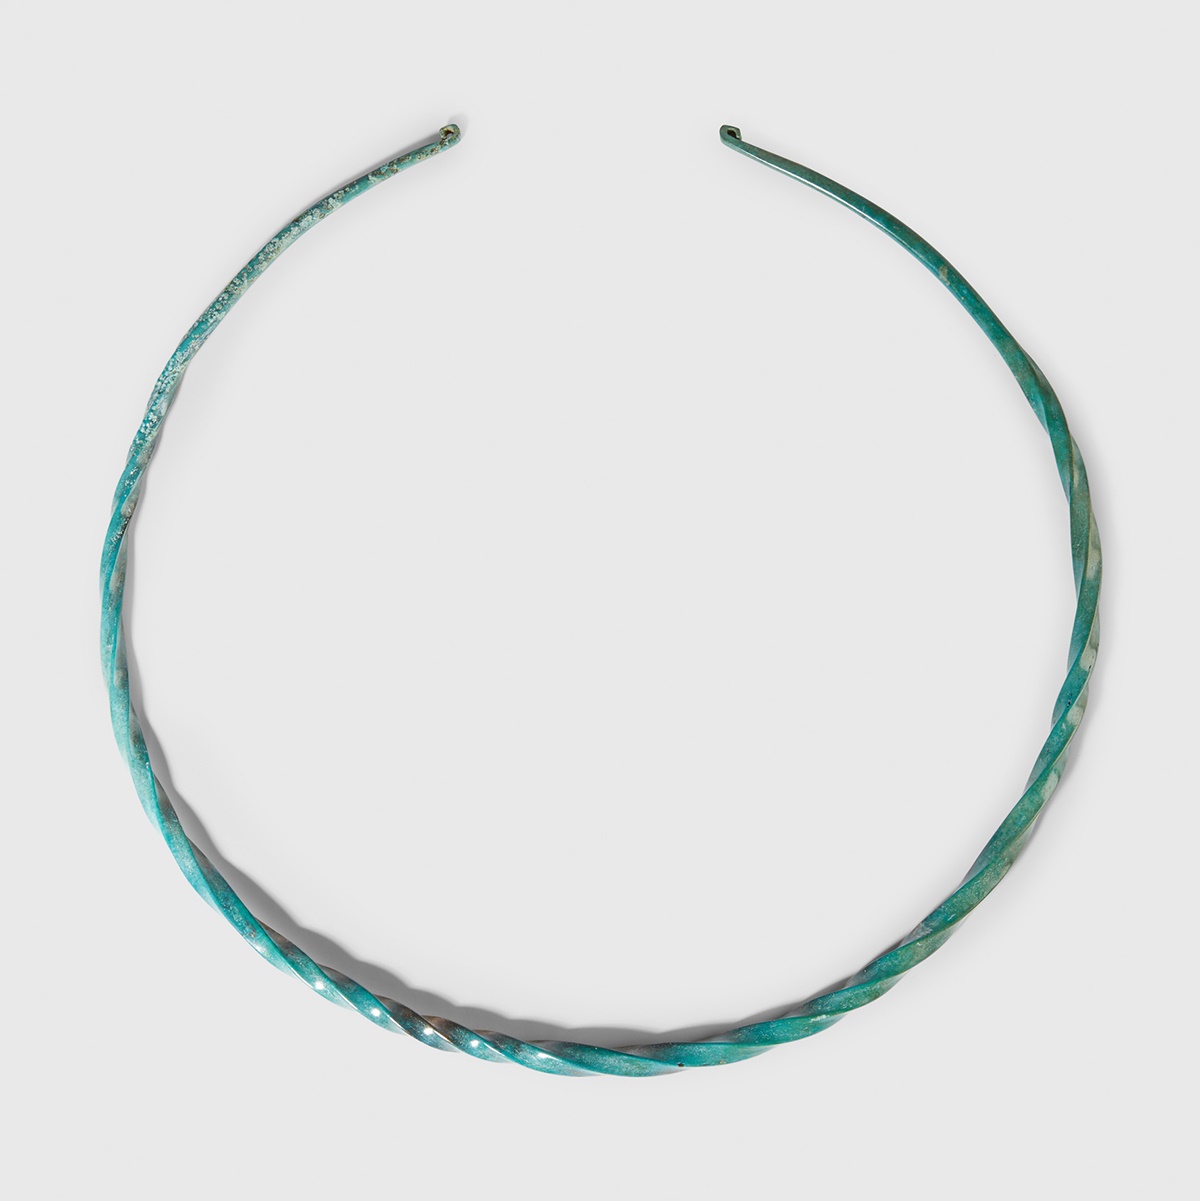 LOT 22 | BRONZE AGE NECK TORC | CENTRAL EUROPE, C. 1200 B.C. | £600 - £900 + fees